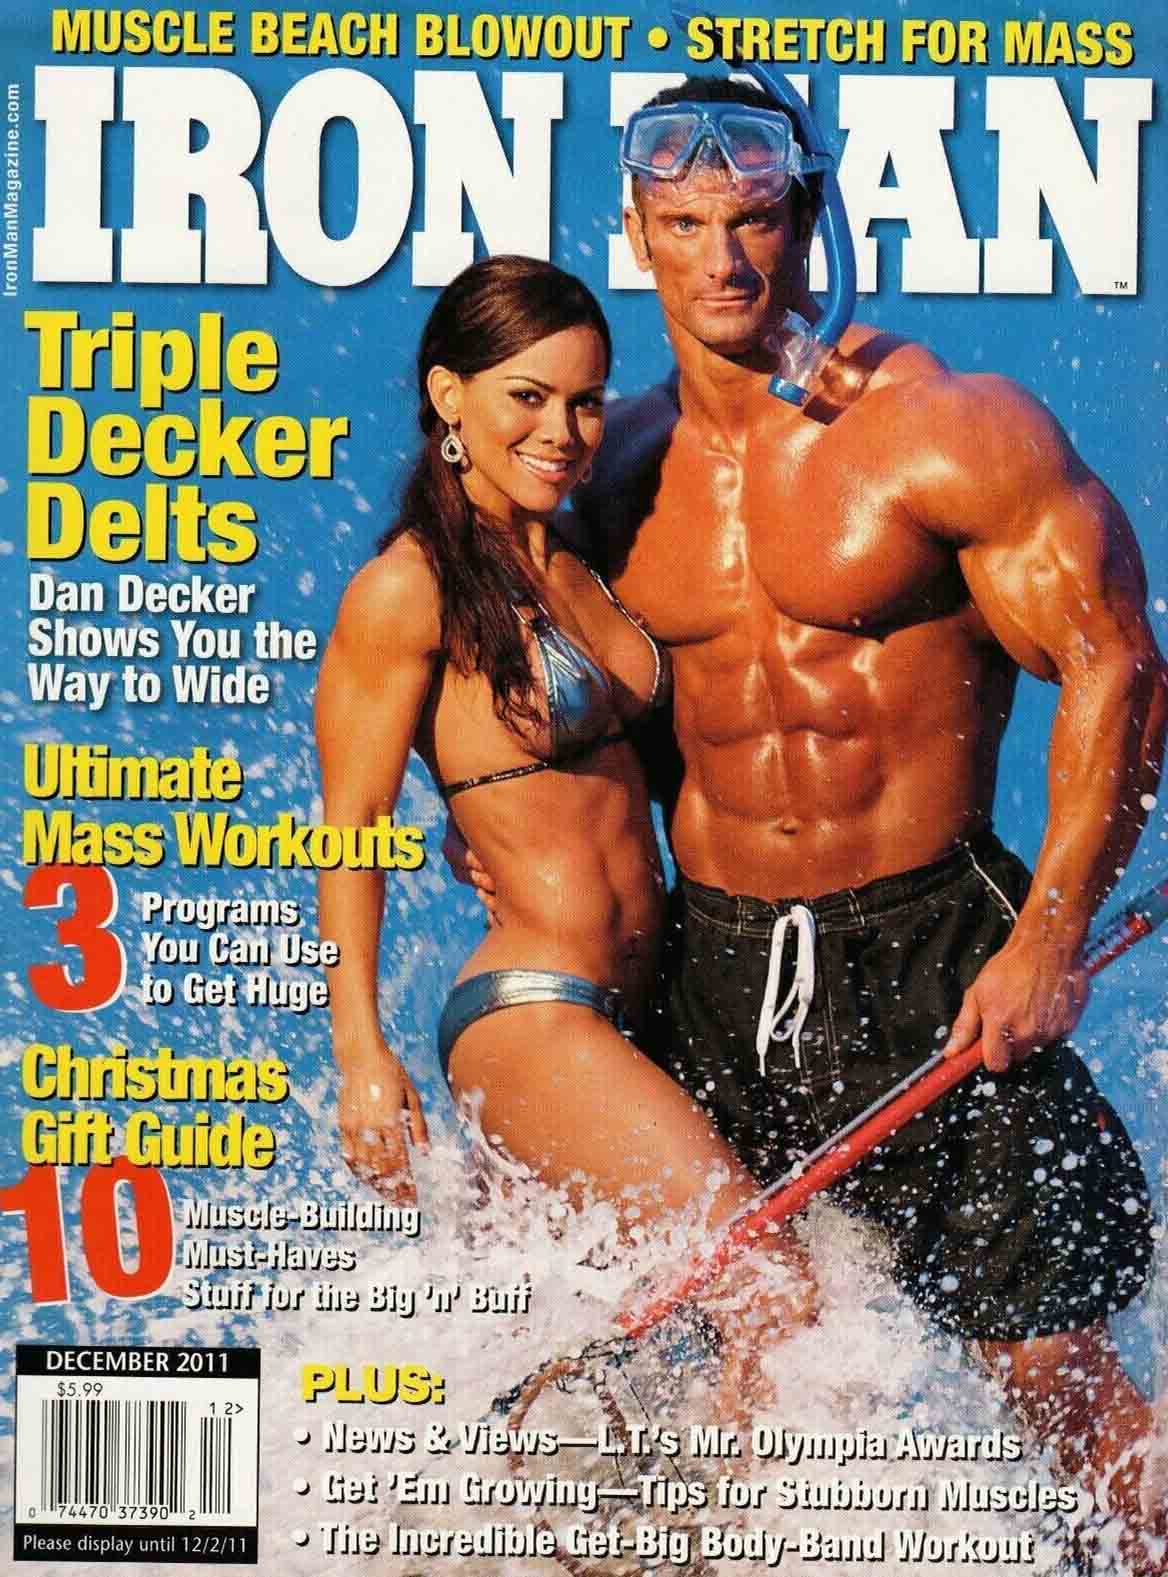 Ironman December 2011 magazine back issue Ironman magizine back copy Ironman December 2011 American magazine Back Issue about bodybuilding, weightlifting, and powerlifting. Published by Iron Man Publishing. Muscle Beach Blowout - Stretch For Mass.